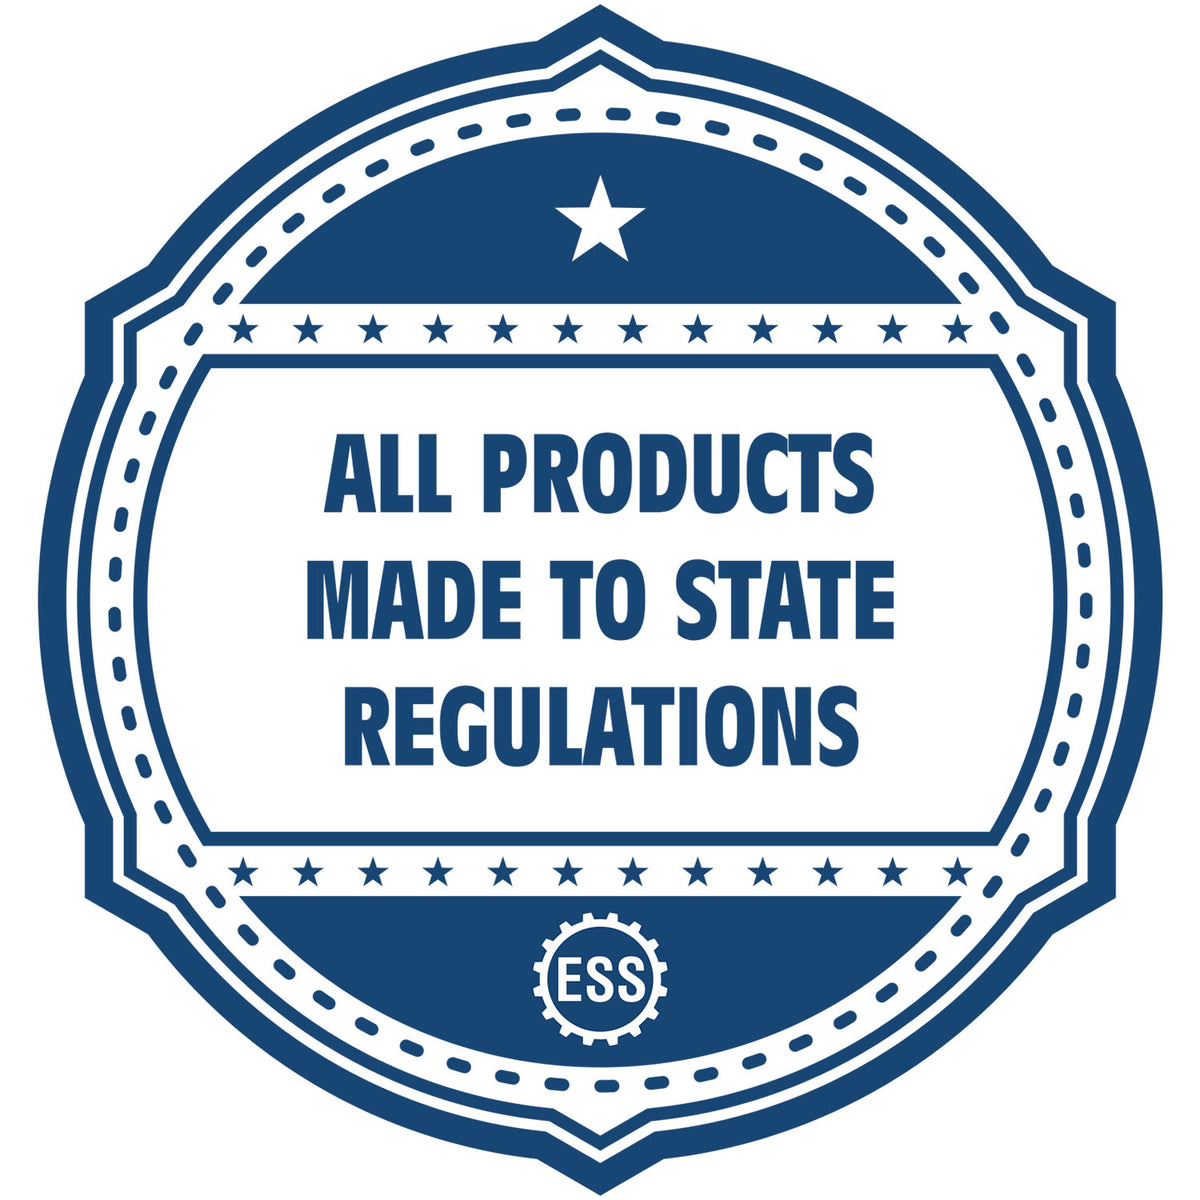 A blue icon or badge for the Gift Illinois Engineer Seal showing that this product is made in compliance with state regulations.